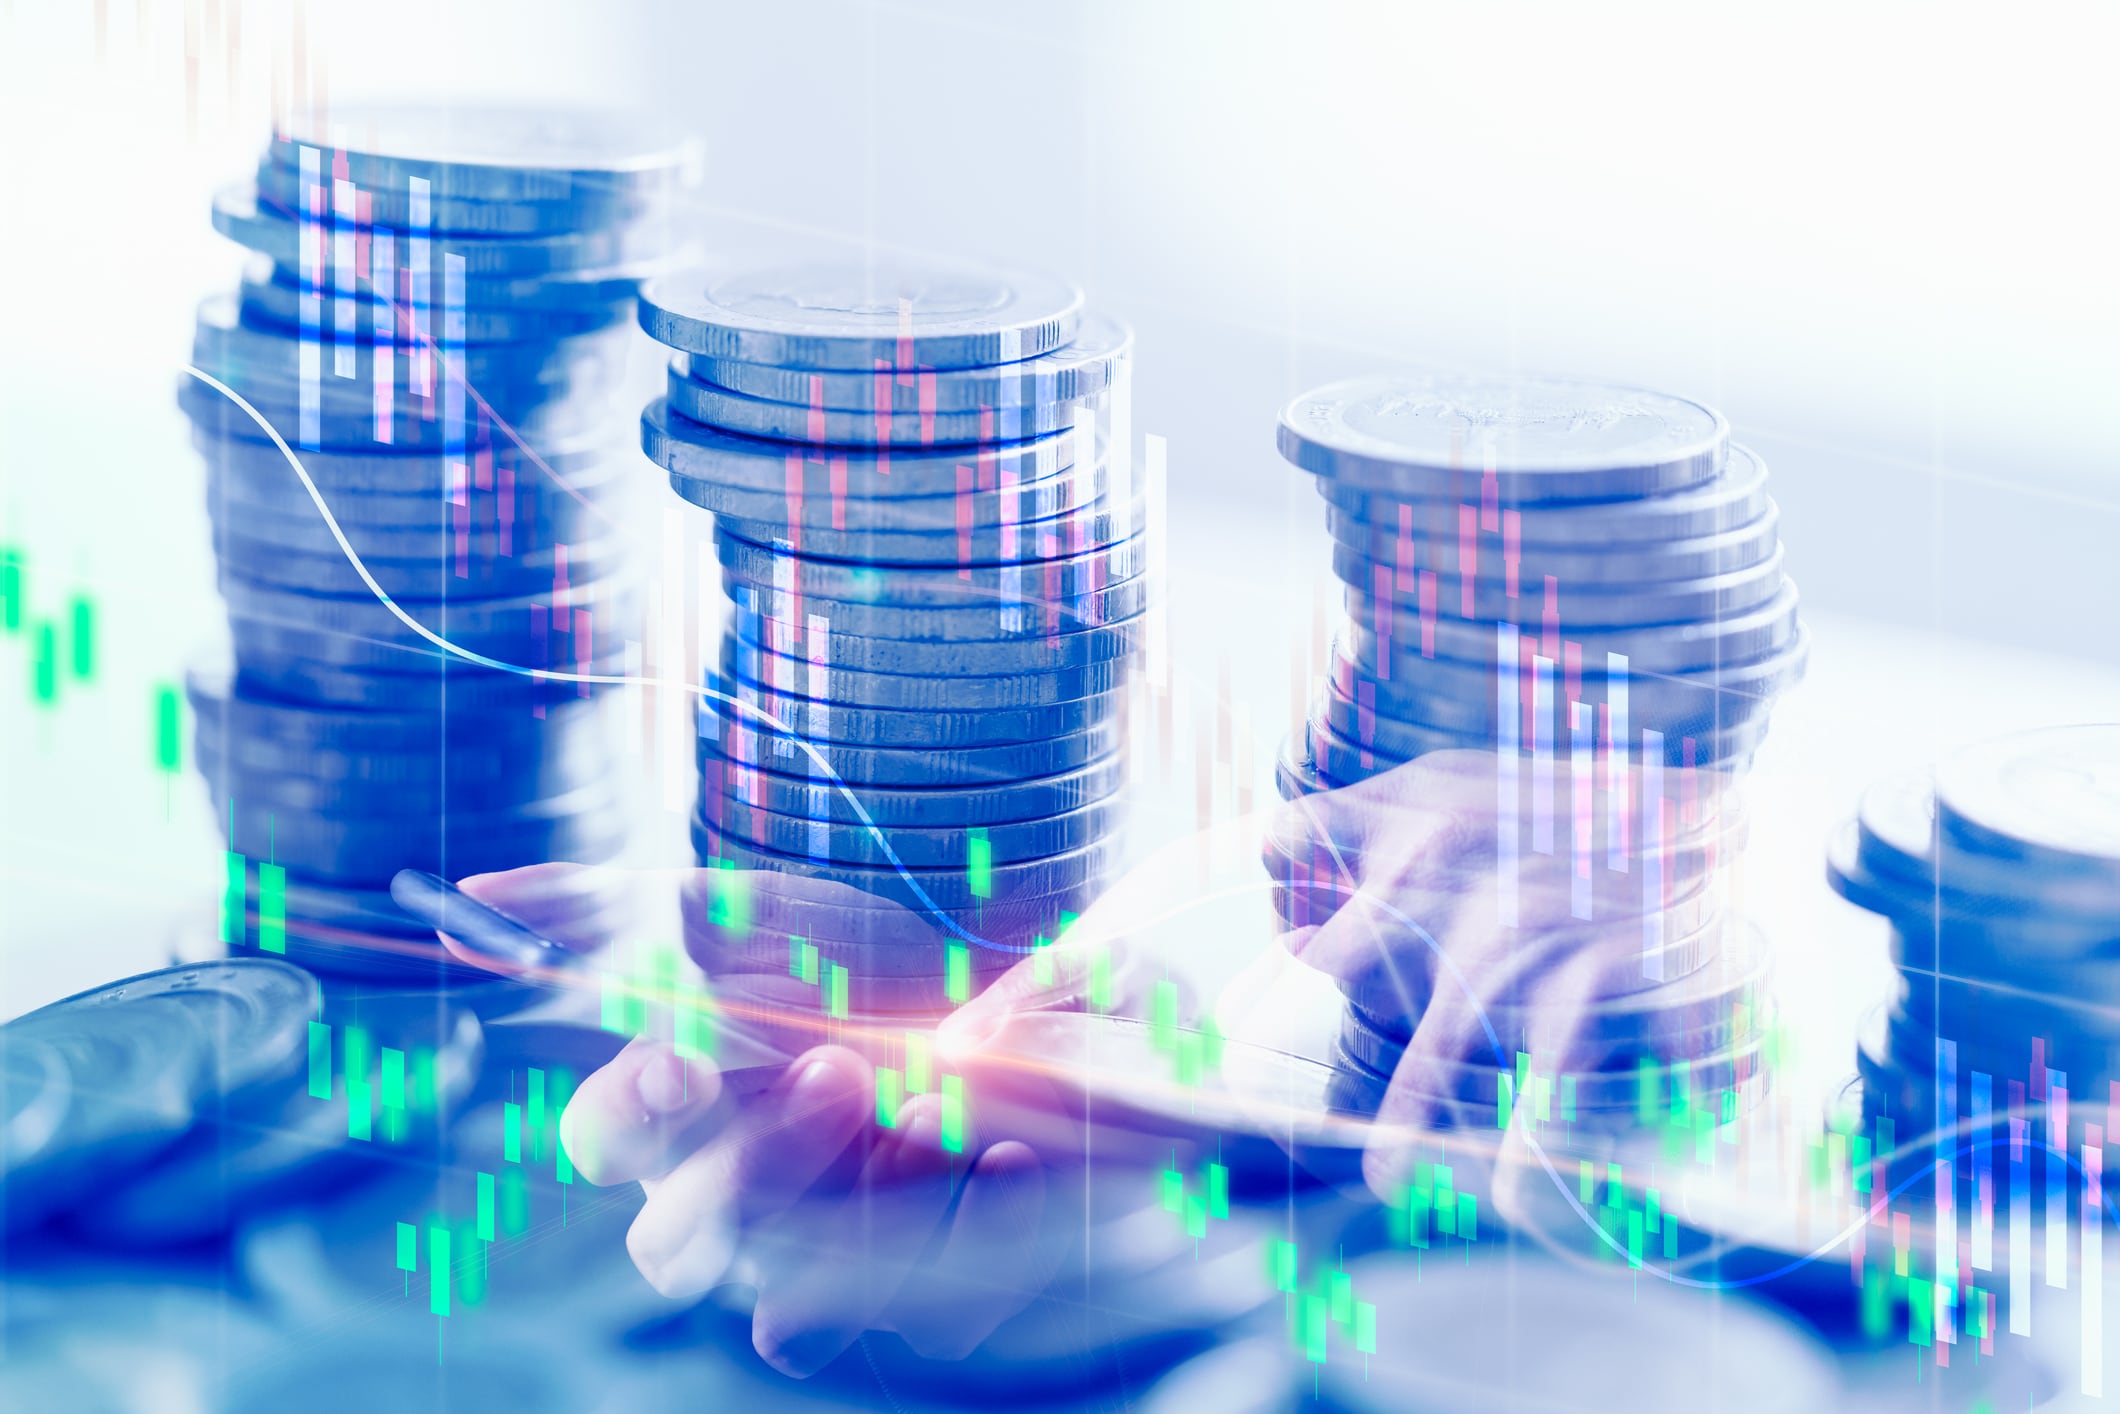 Double exposure business financial business data report and stock market concept, stock market or trading graph and coin